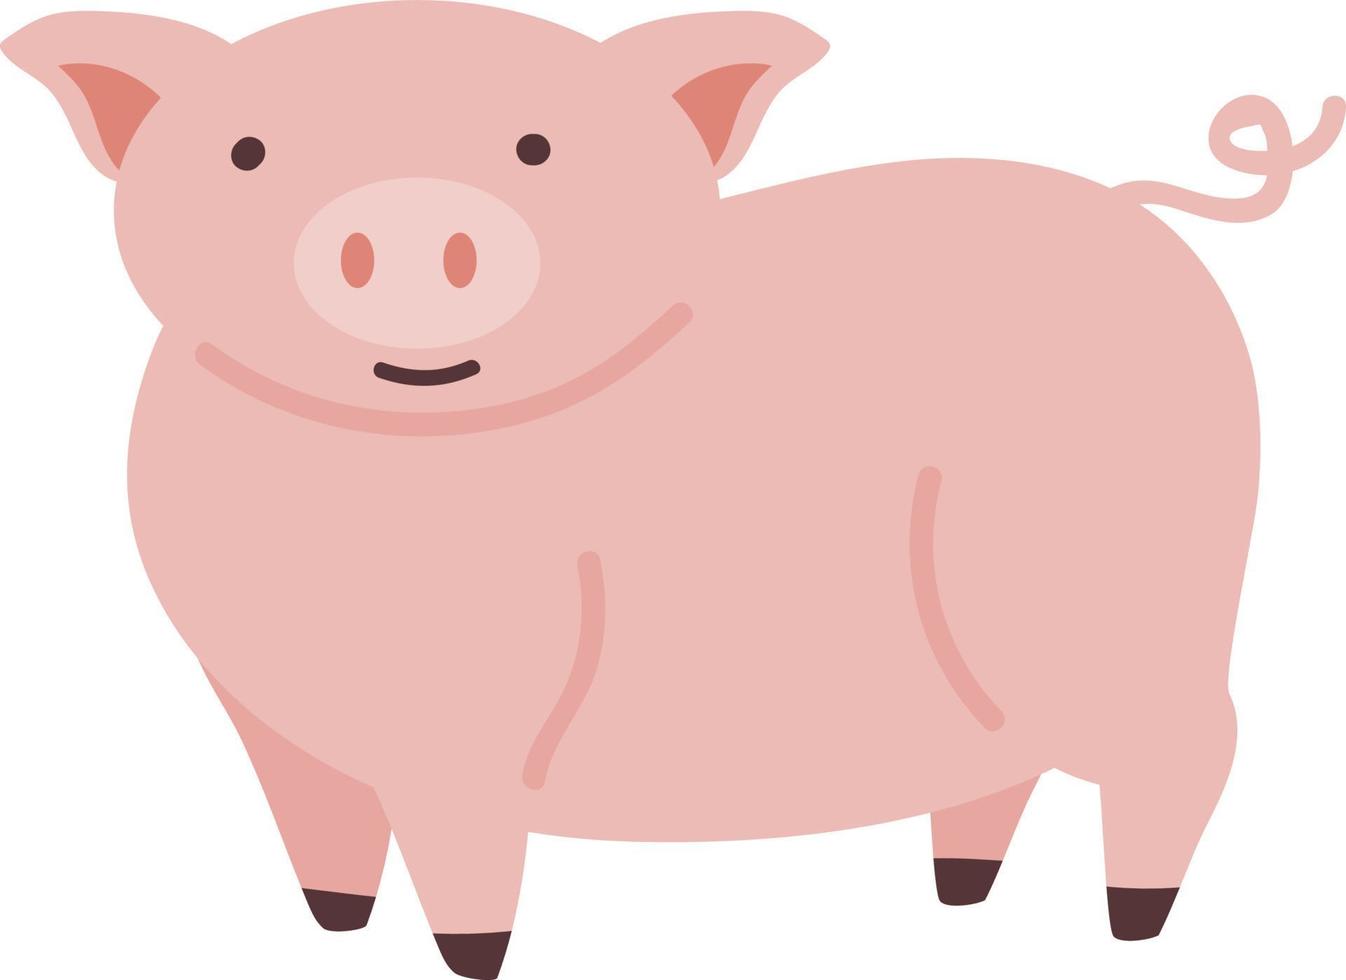 Pink cute pig, illustration, vector on white background.